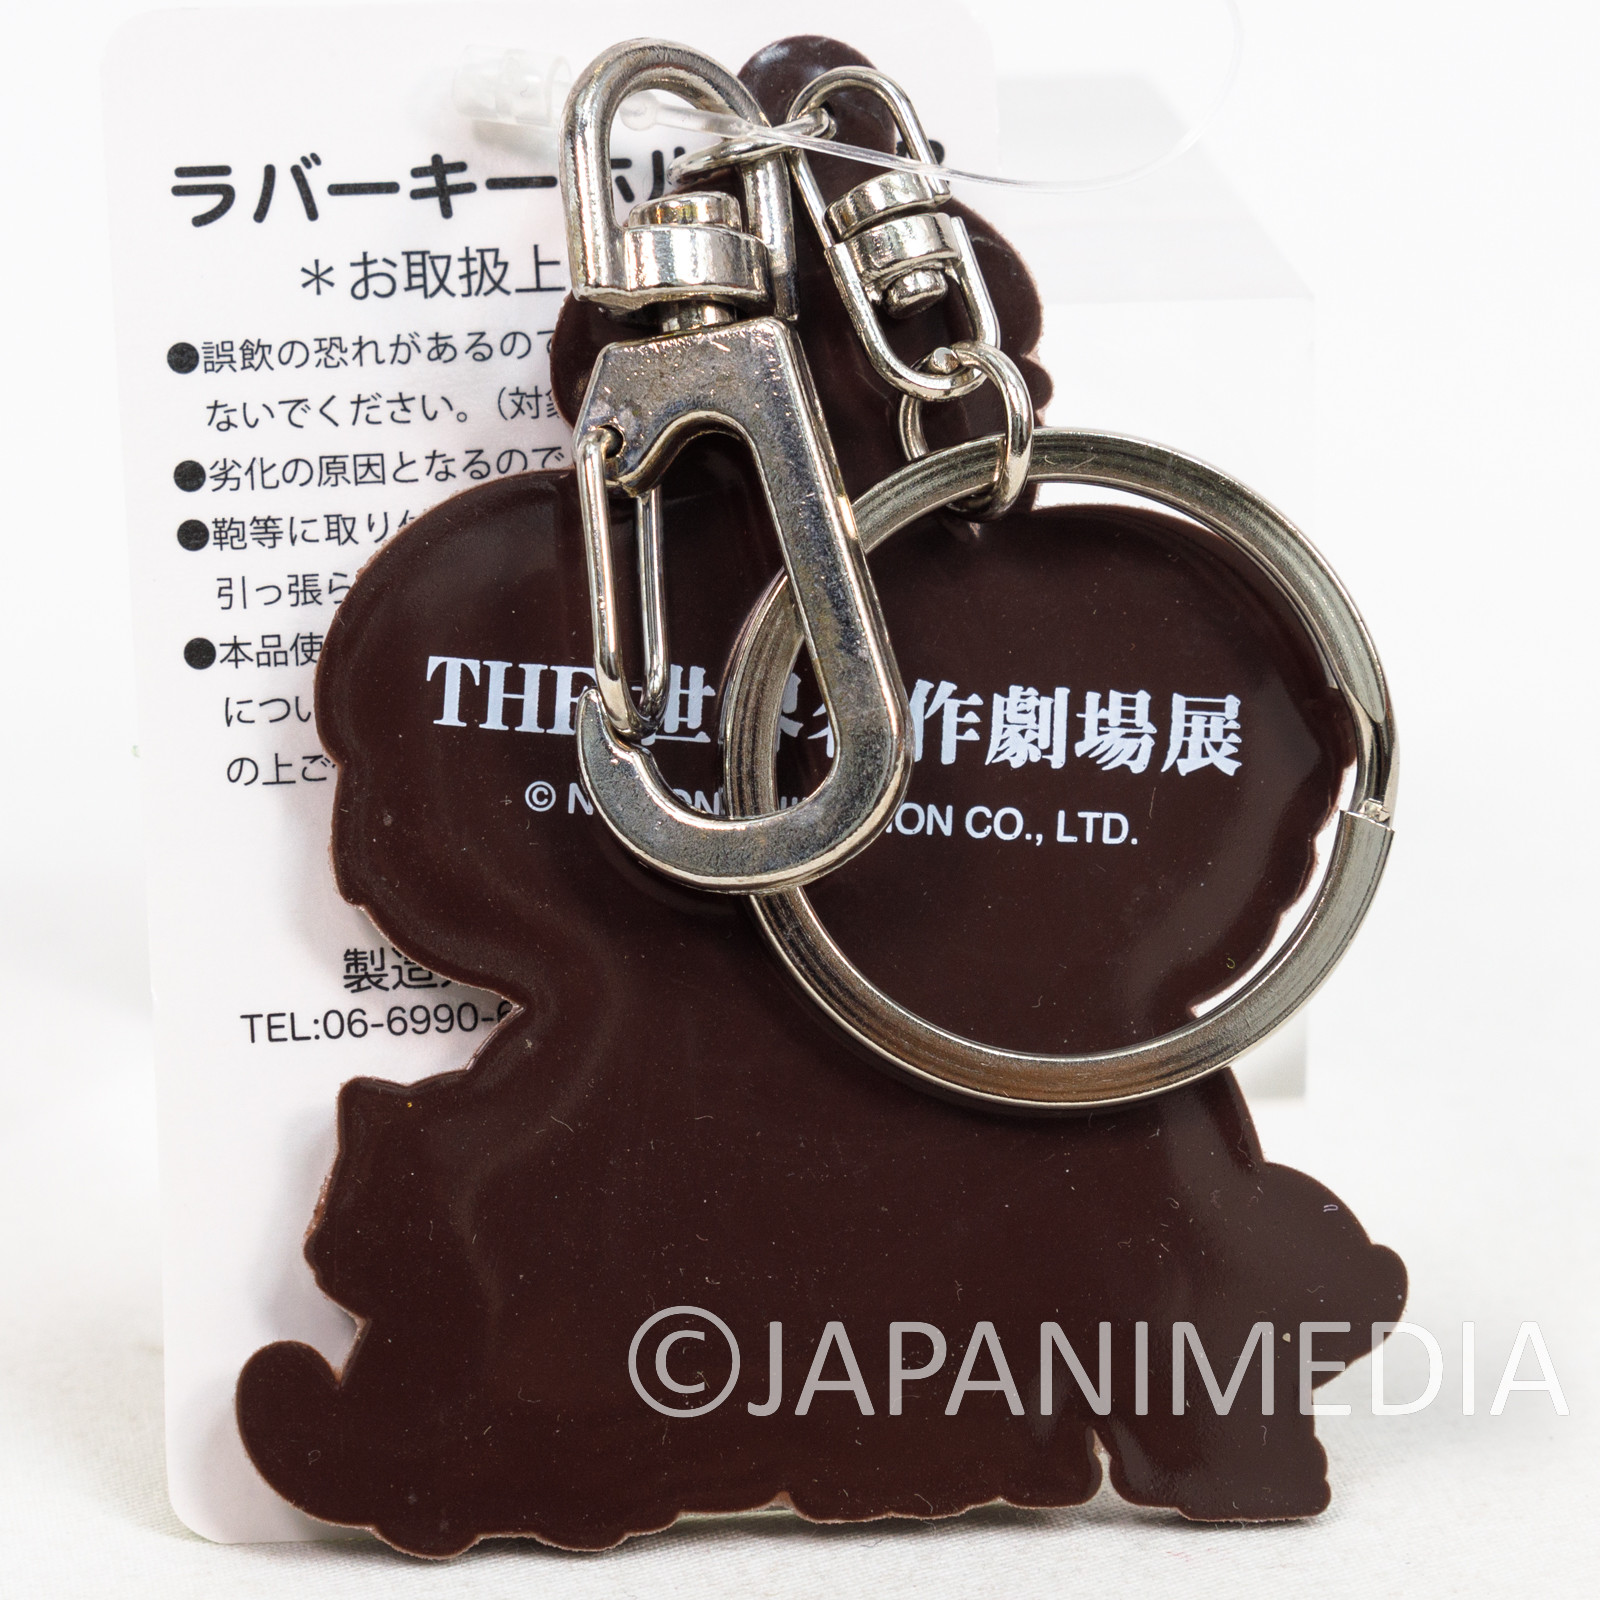 World Masterpiece Theater Rubber Mascot Keychain / Dog of Flanders / Amedeo/ Rascal